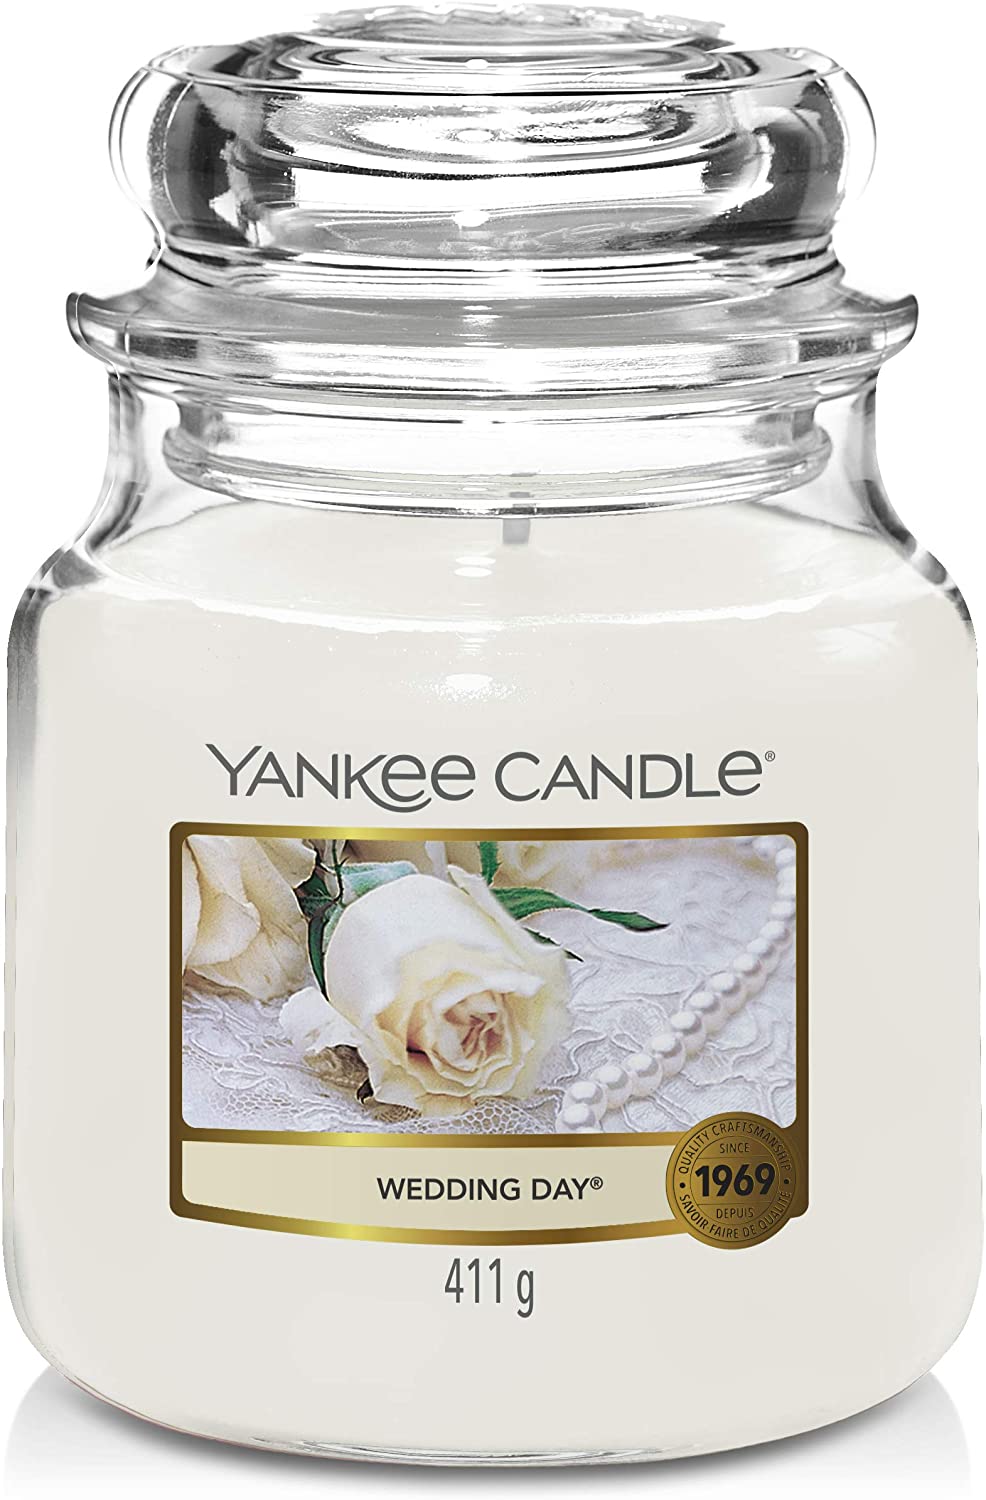 Yankee Scented Candle In A 623 G Jar.